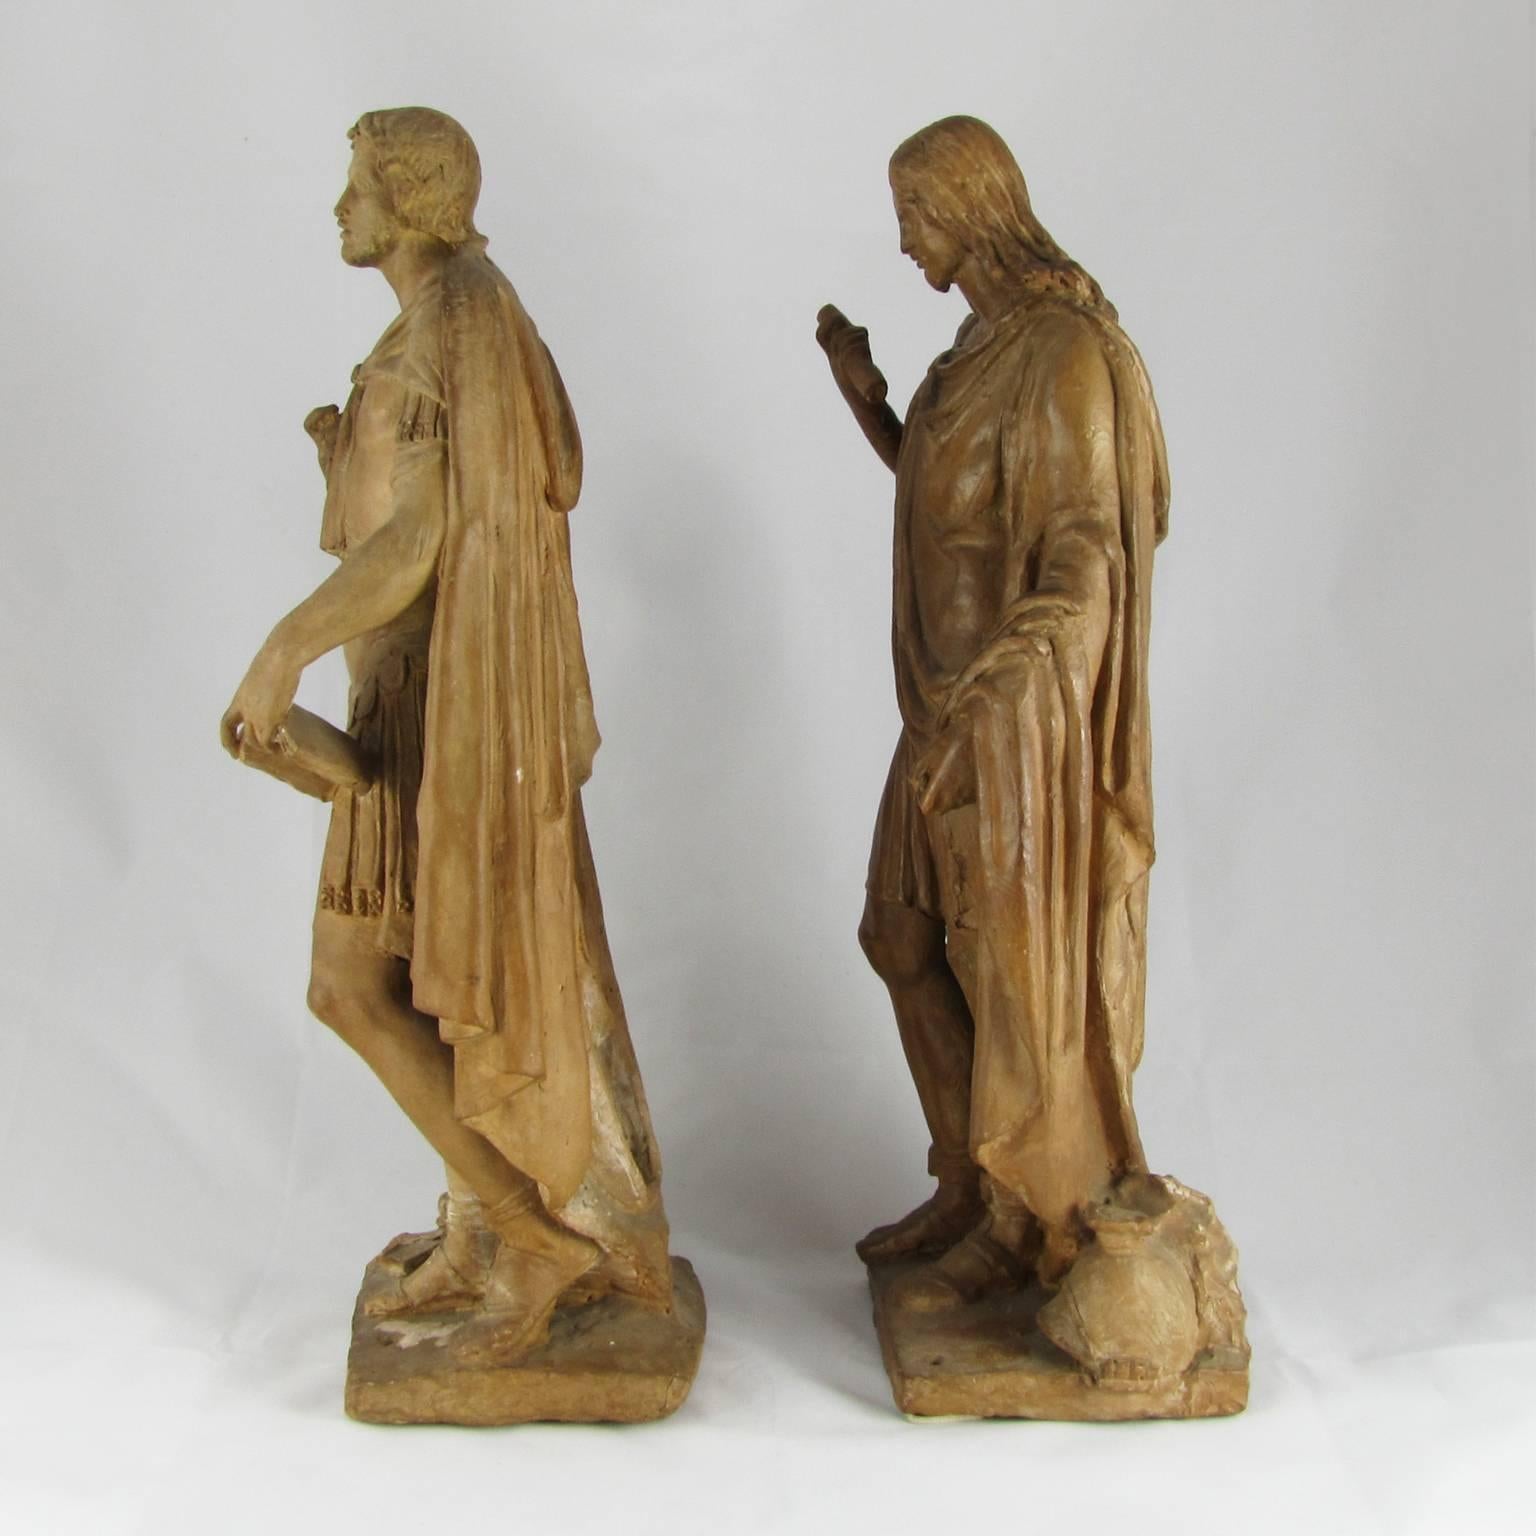 Two Early 18th Century Italian Unglazed Terracotta Sculptures Depicting Saints 4